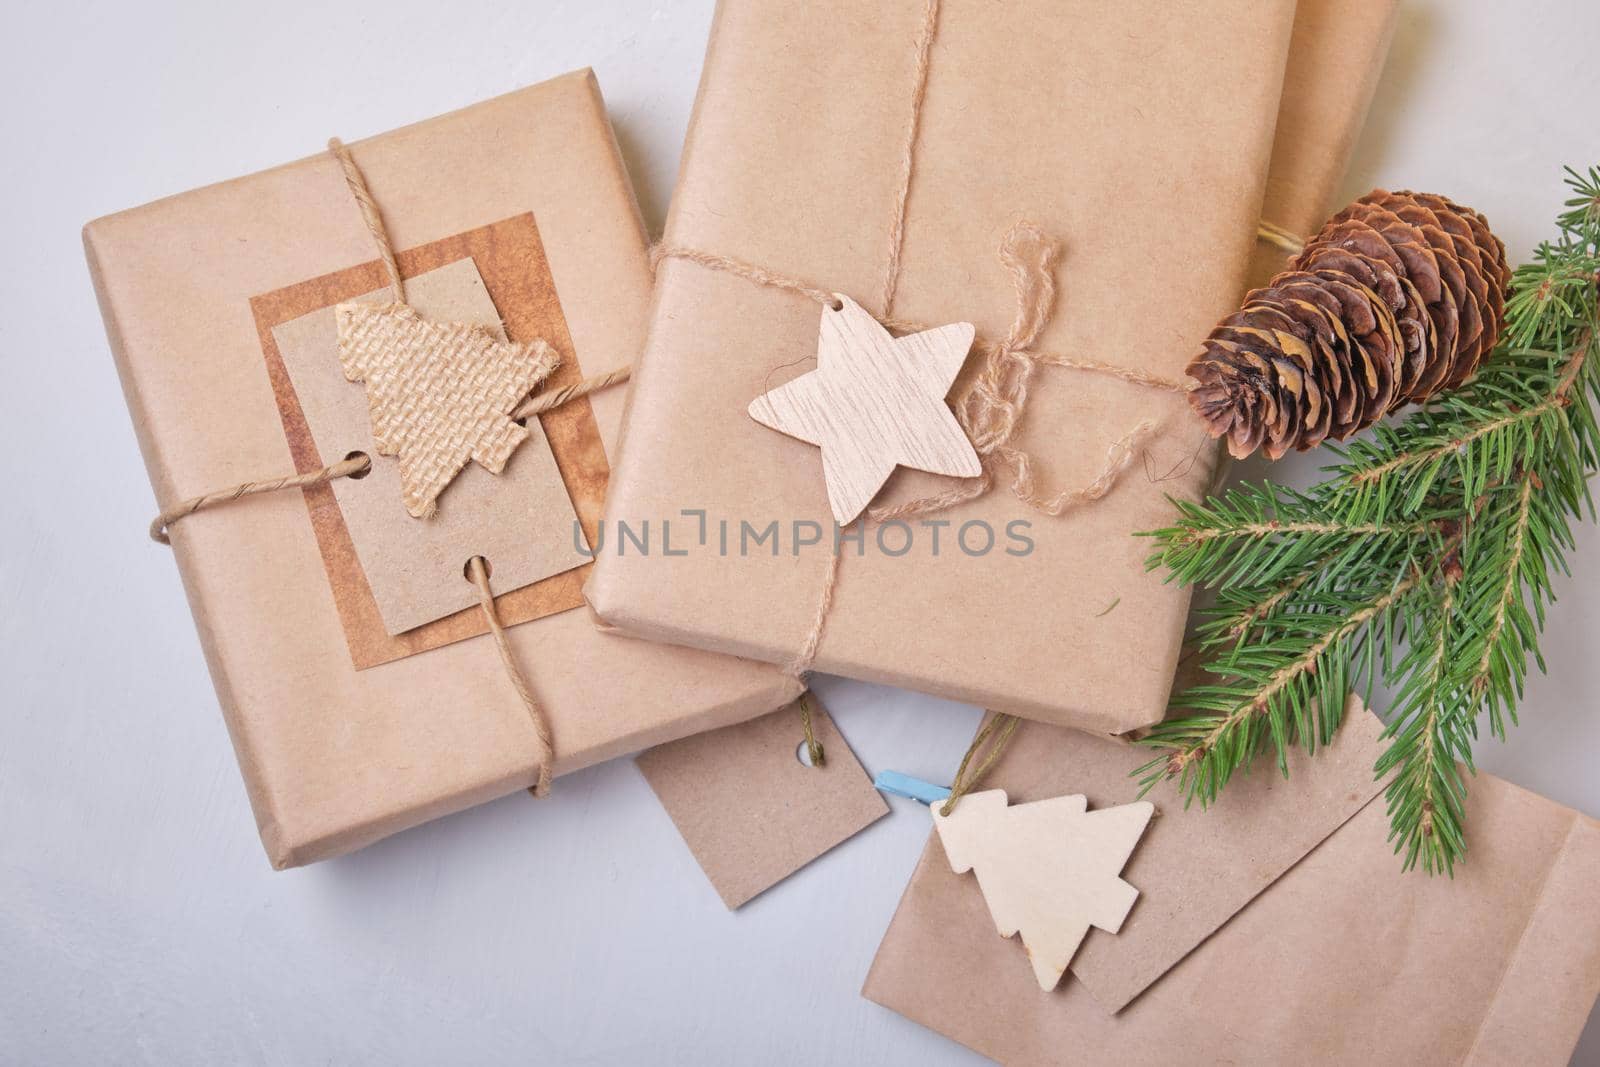 several boxes of gifts packed in eco paper on the table, zero waste lifestyle concept, packaging for DIY gifts, top view, gray background, eco christmas by natashko